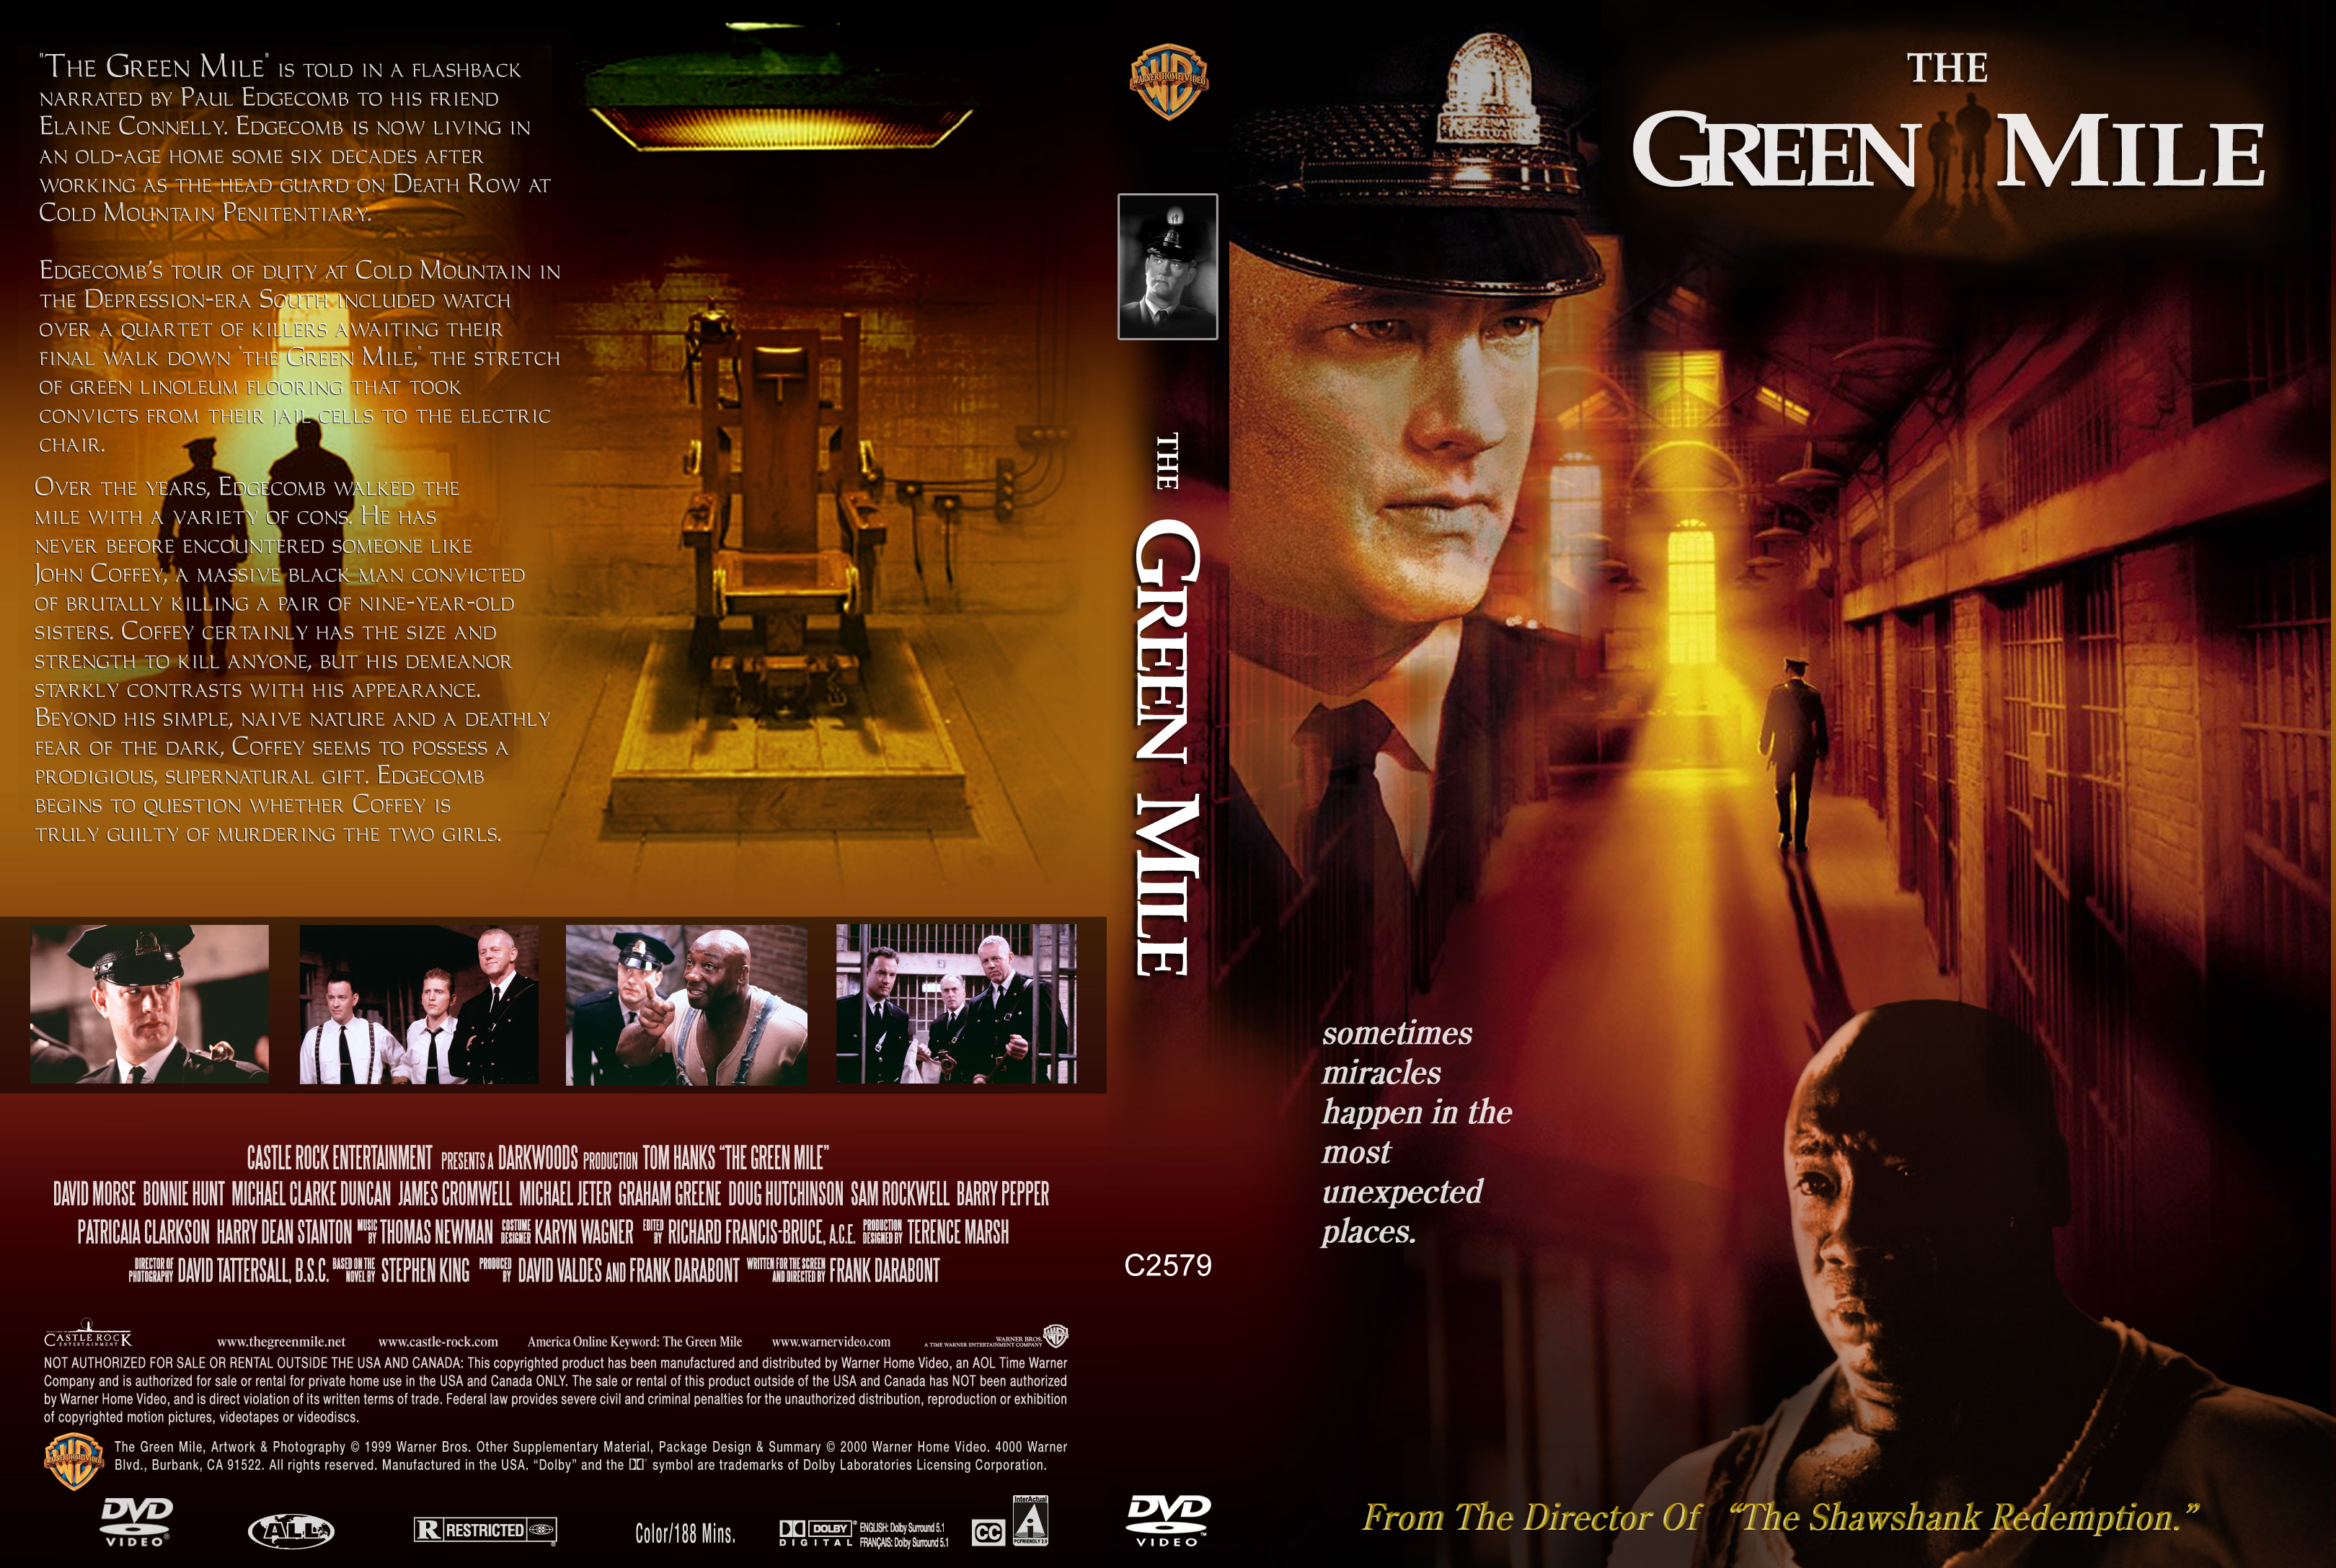 the, Green, Mile, Drama, Poster Wallpaper